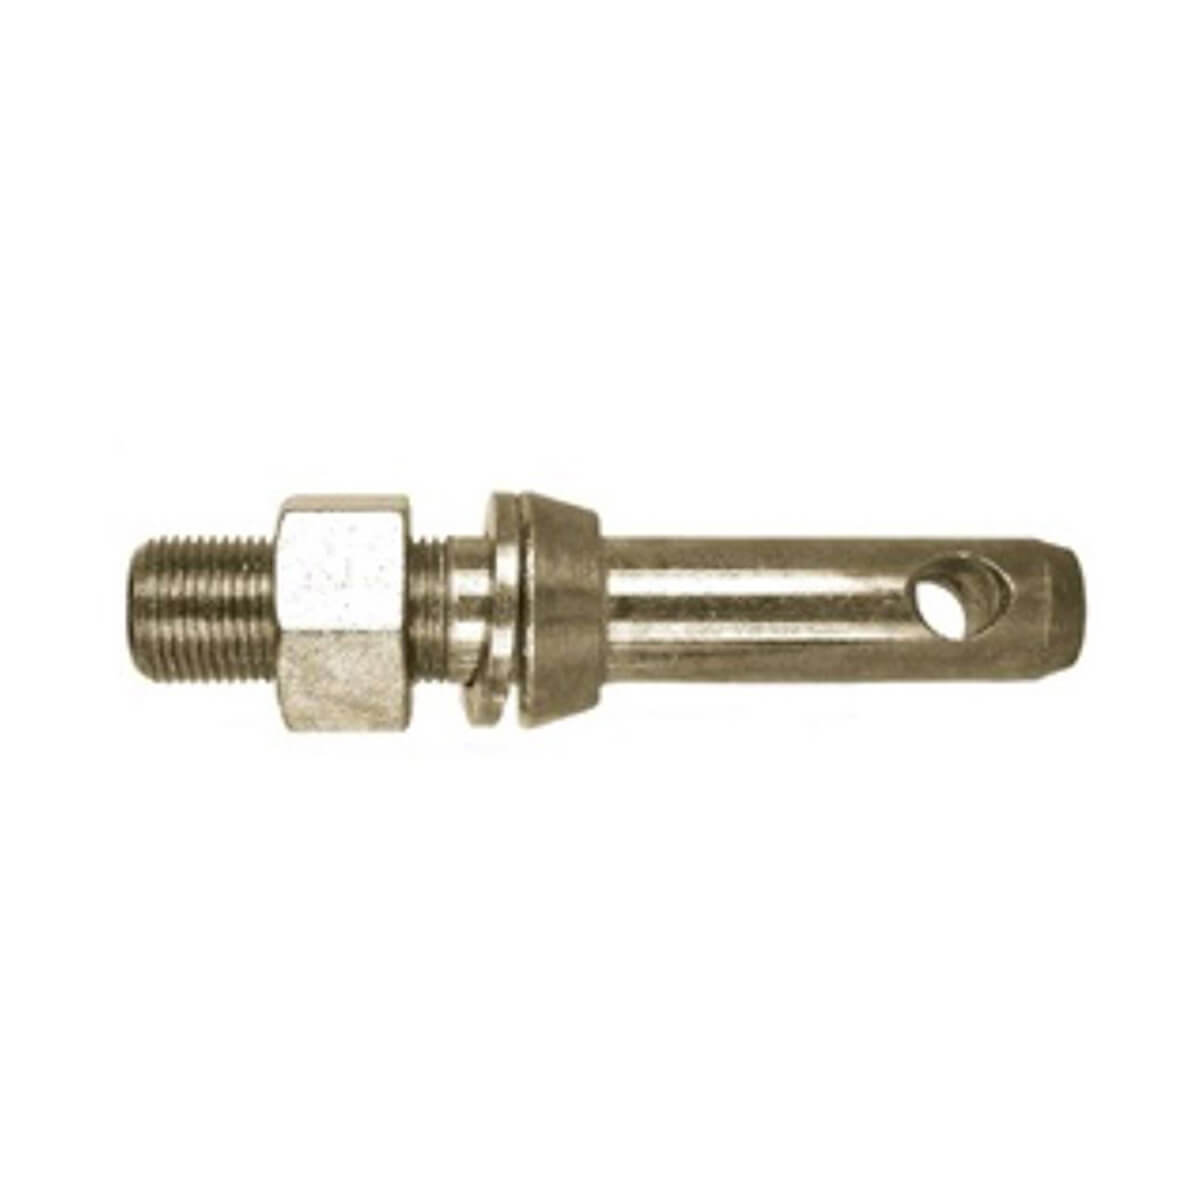 Adjustable Category 1-2 Forged Lift Arm Pin